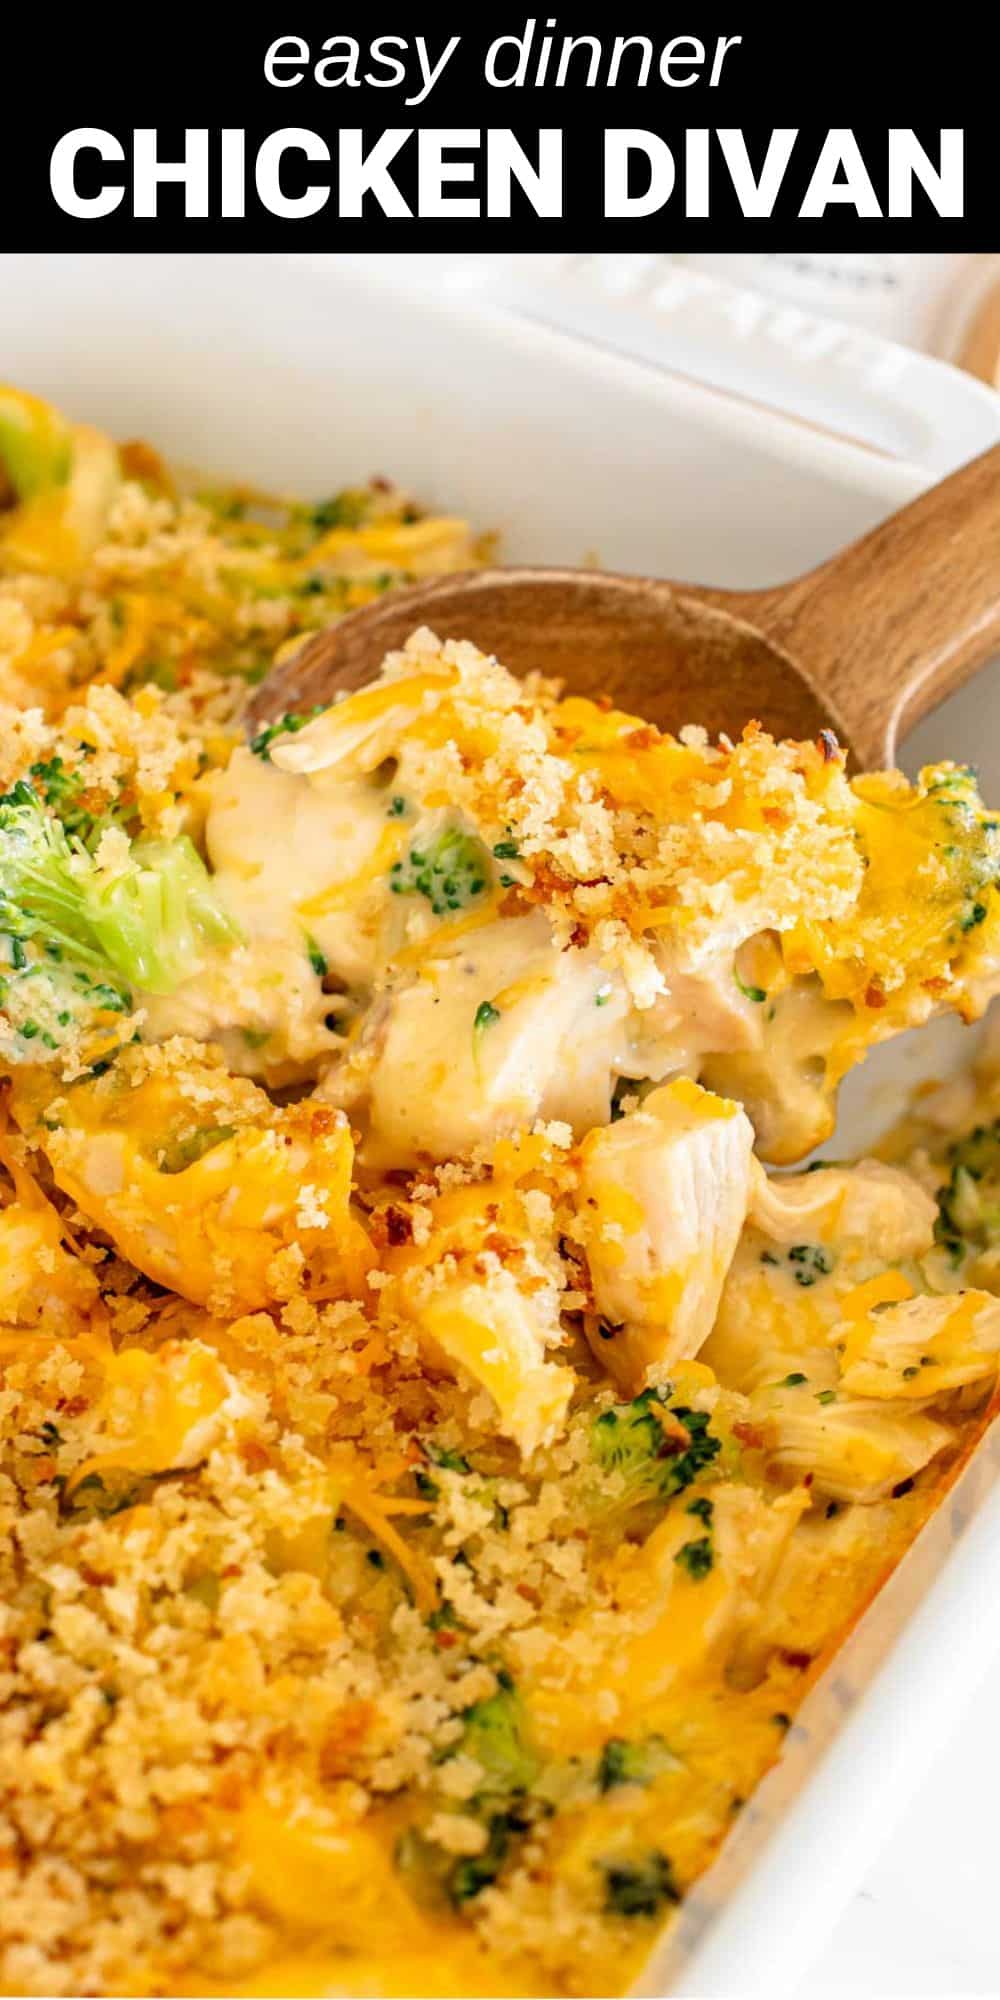 Filled with comforting goodness, this delicious recipe for Chicken Divan can be ready, from prep to plate, in just 30 minutes. Made with juicy, succulent chicken, tender broccoli florets, and savory cream sauce, this dish will be a new family favorite. 